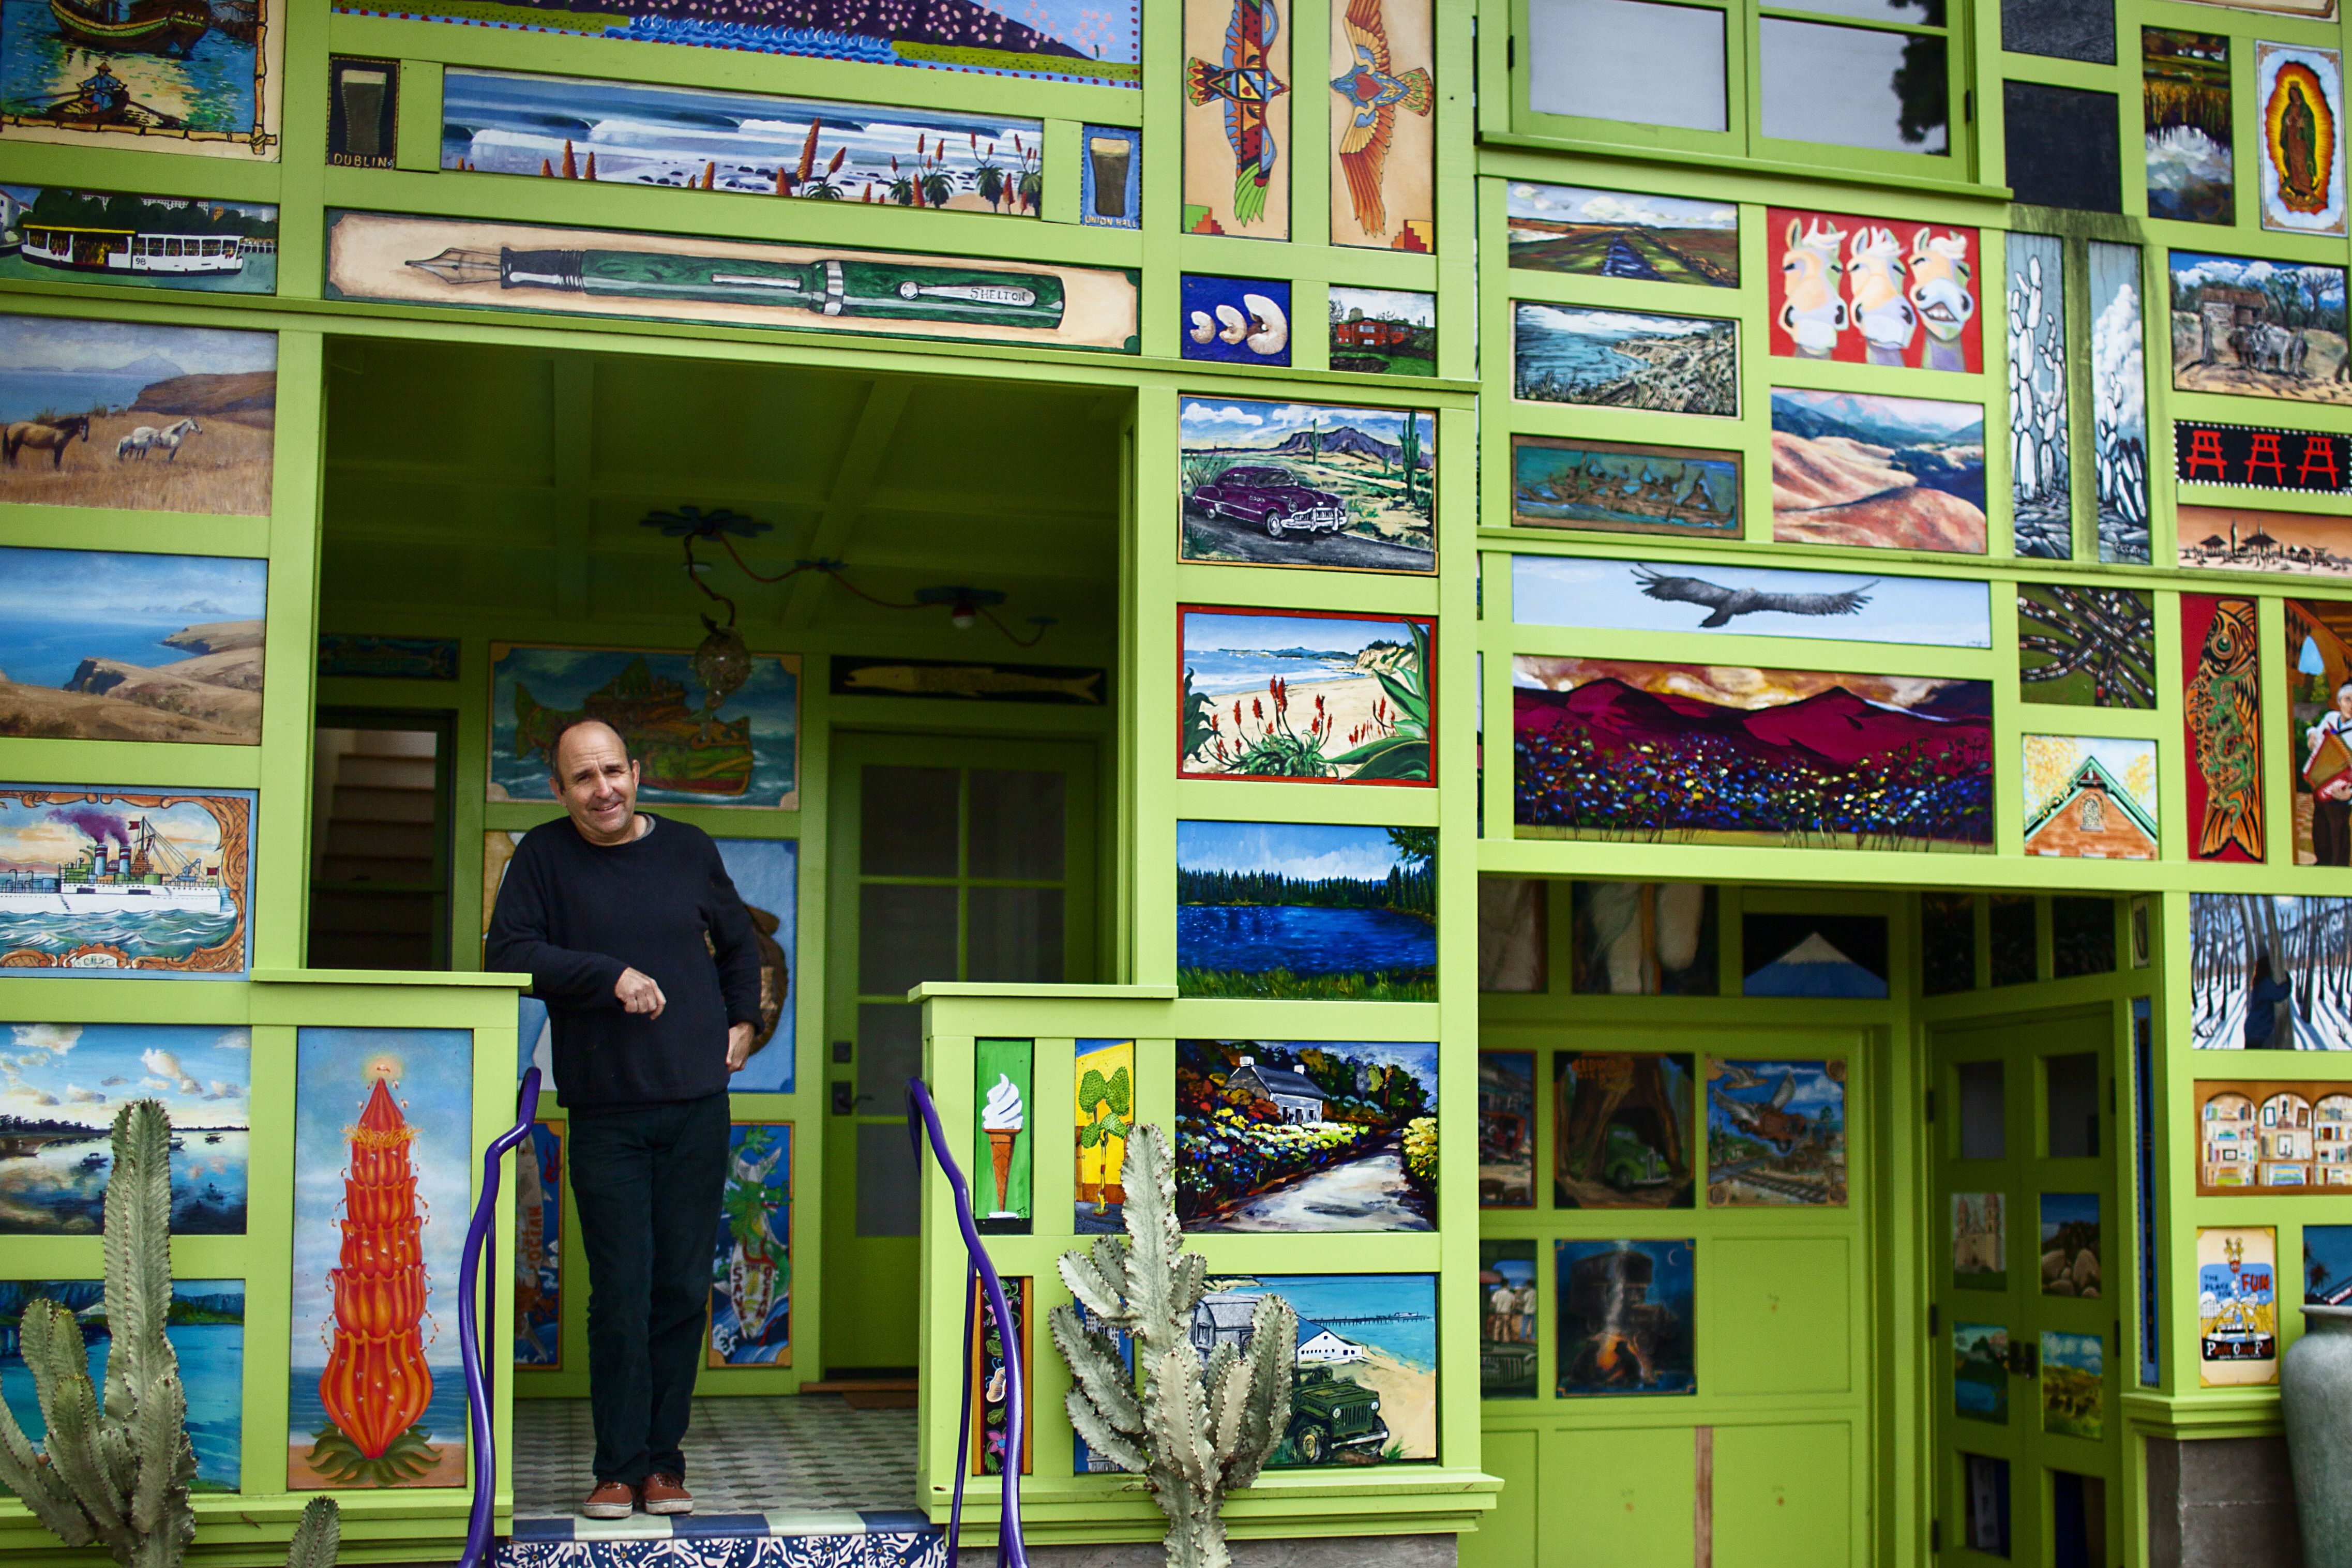 Santa Barbara architect Jeff Shelton standing in the doorway of the lime green and poster-covered.